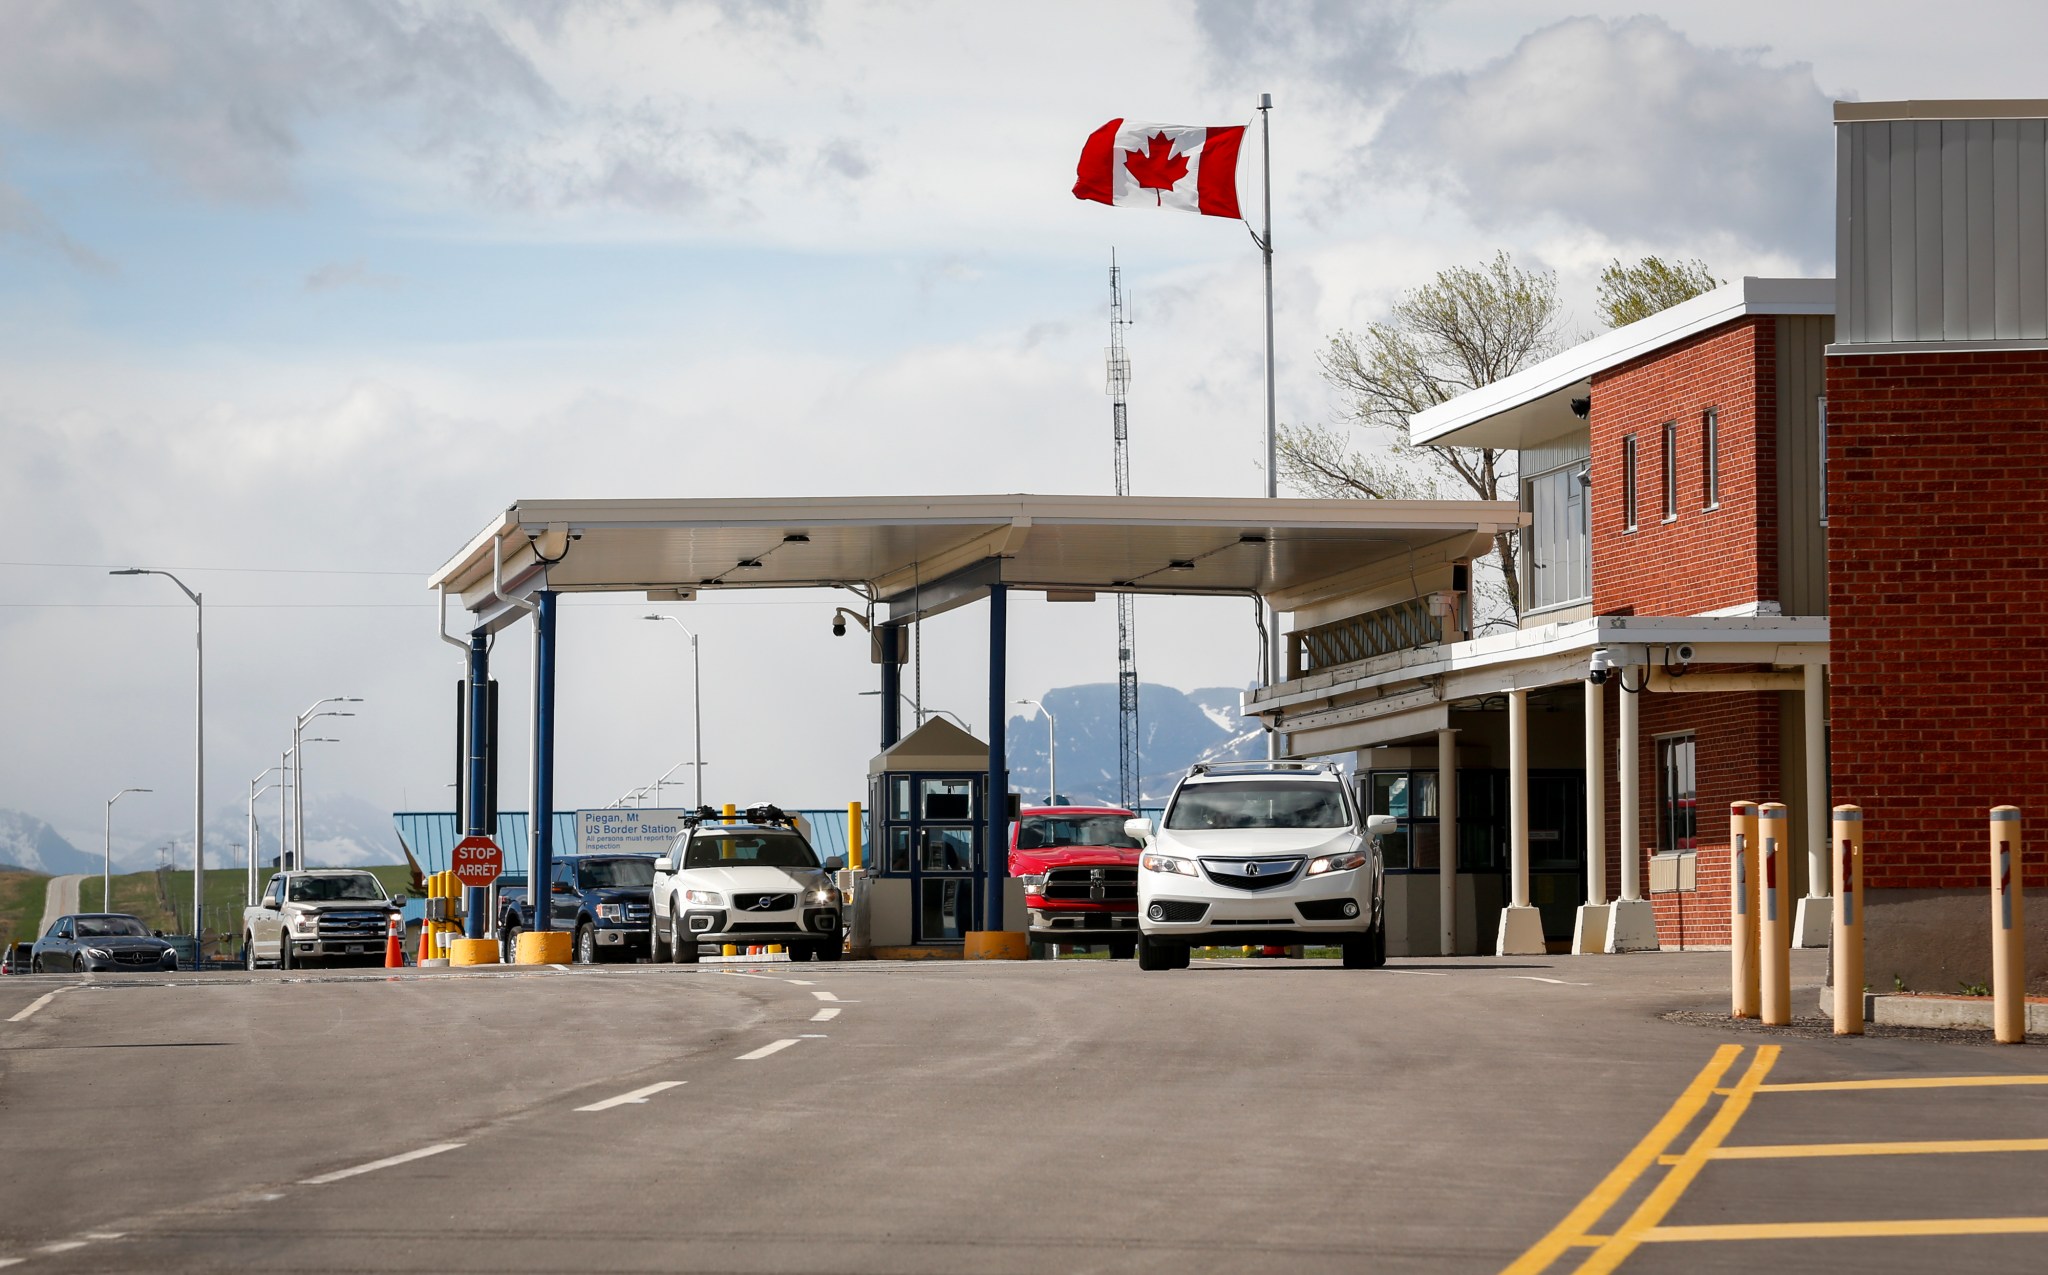 Southern Alberta residents return to Canada after getting shots of a COVID-19 vaccine from a Montana tribe in Carway, Alta., Tuesday, May 18, 2021.